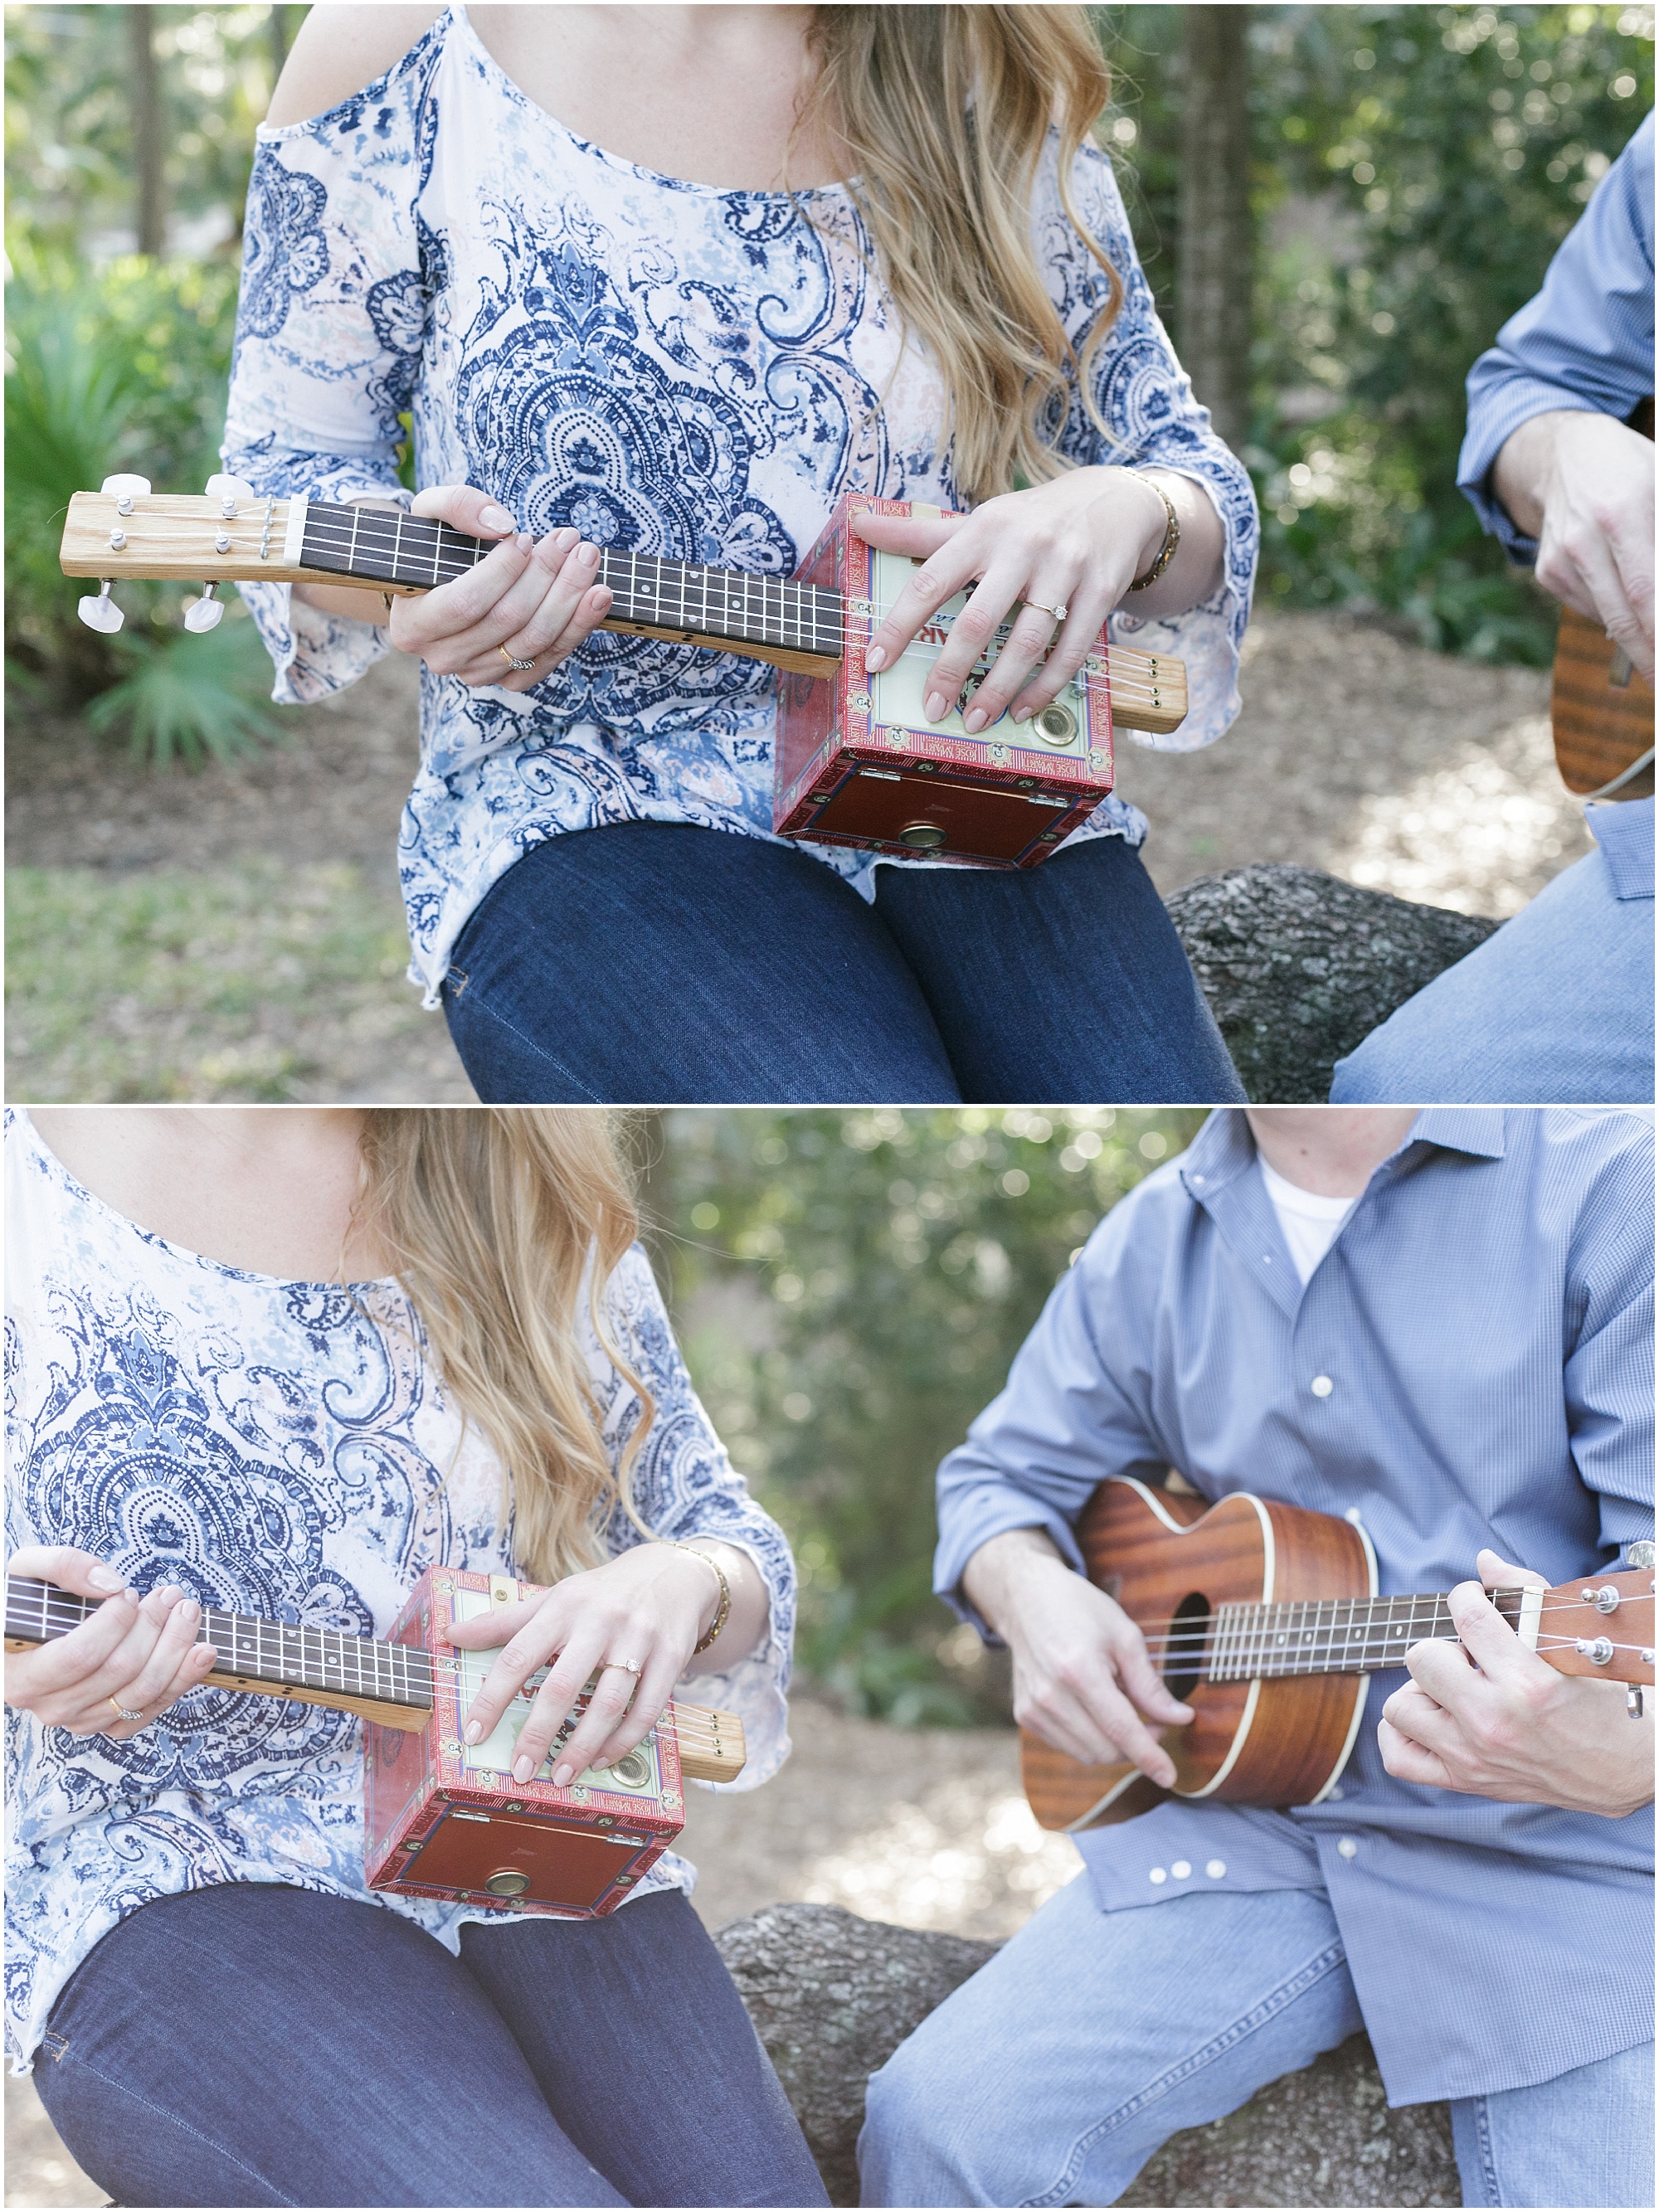 Woman with a ukulele handmade from a cigar box and a guy with small guitar. 